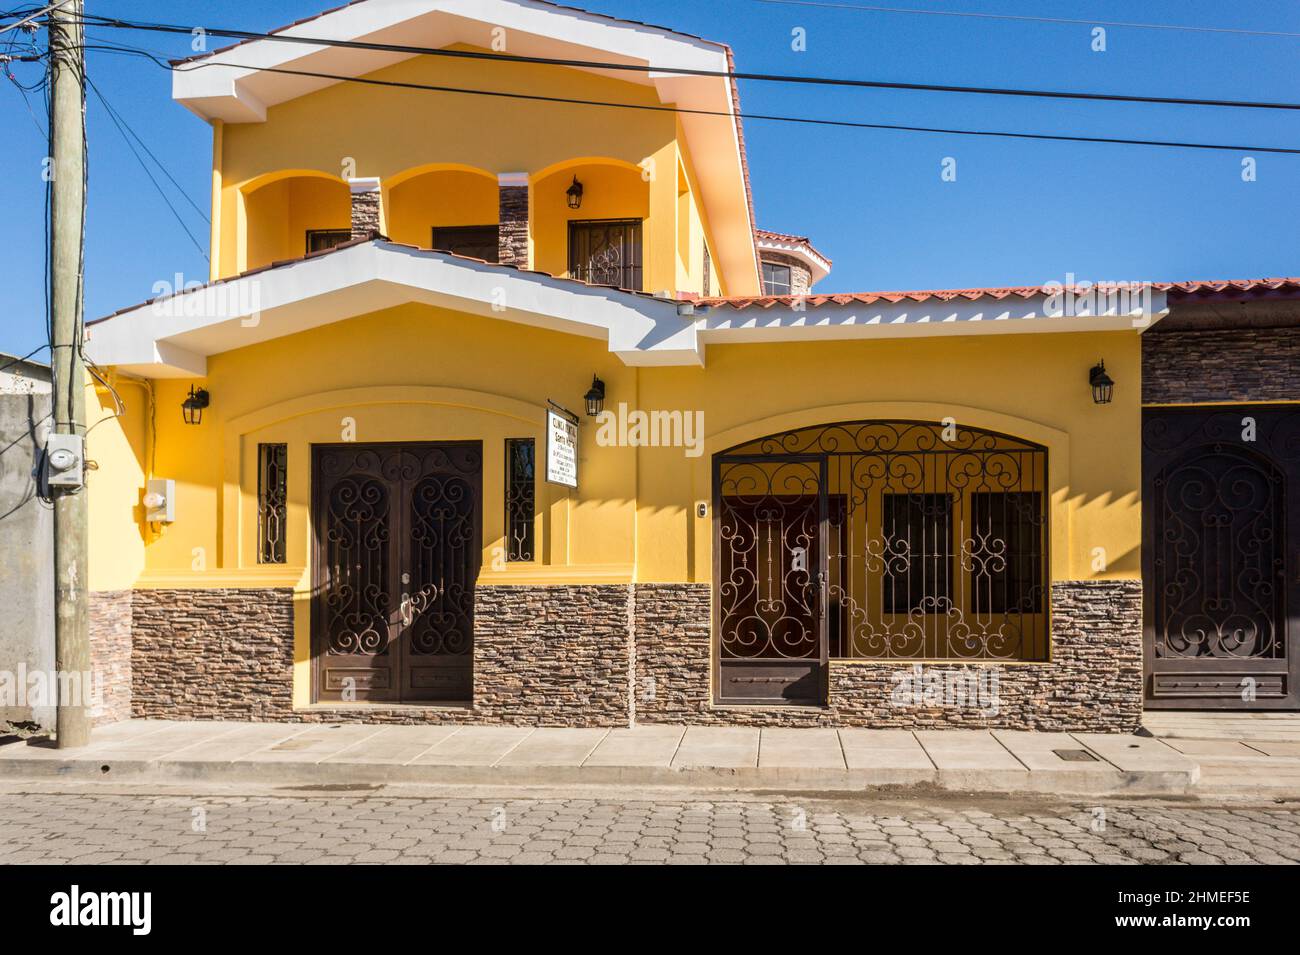 Well-off dentists built a clinic with their dwelling space behind and above the clinic in Jinotega, Nicaragua Stock Photo